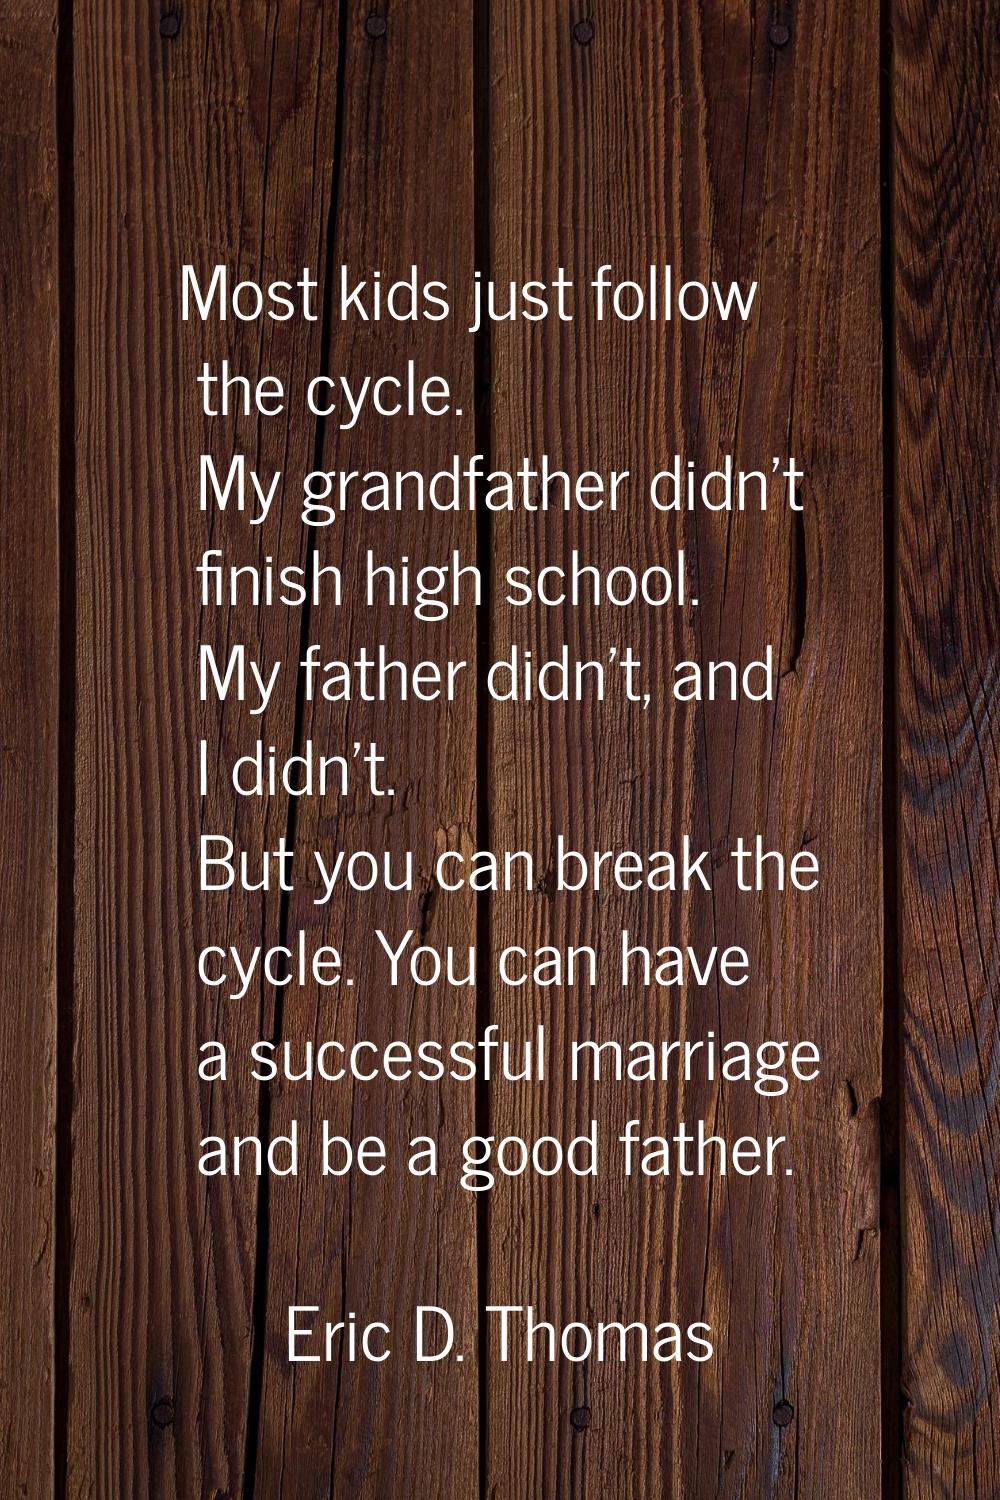 Most kids just follow the cycle. My grandfather didn't finish high school. My father didn't, and I 